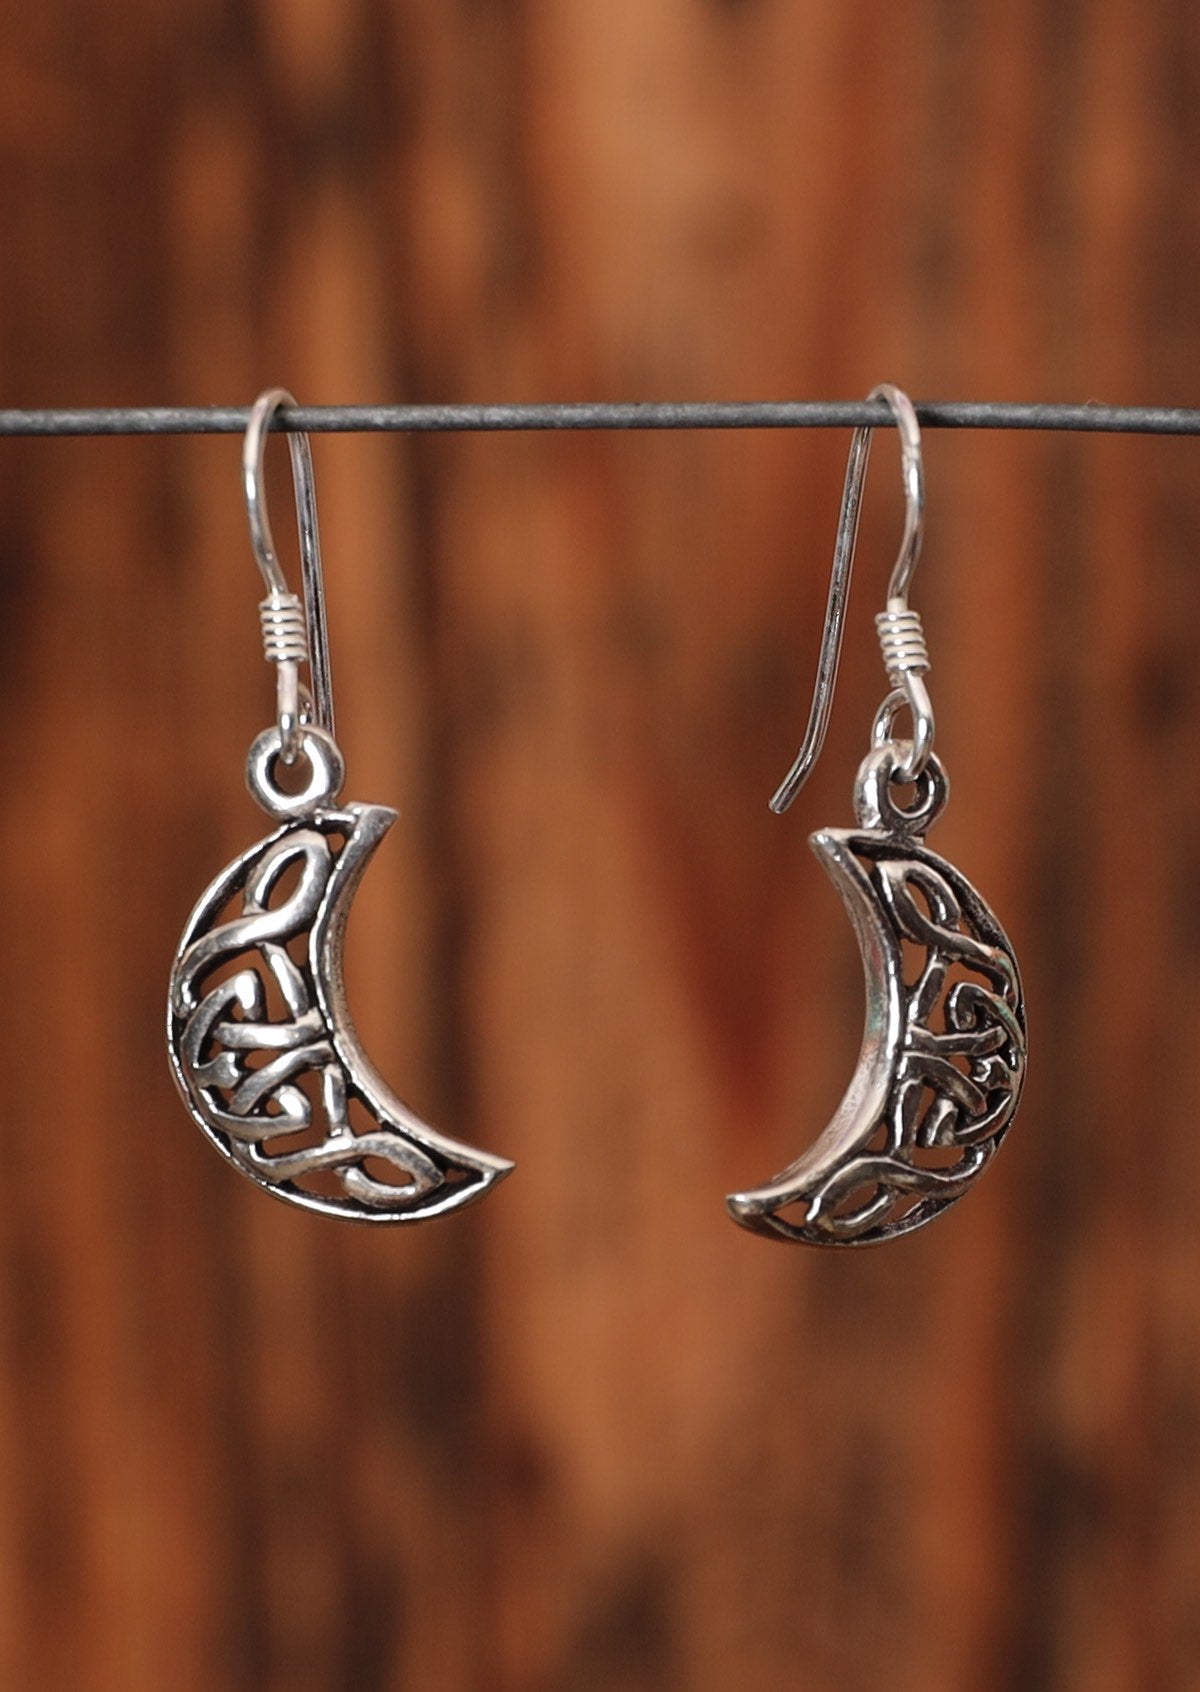 92.5% silver Celtic style hanging moon earrings sit on a wire for display. 